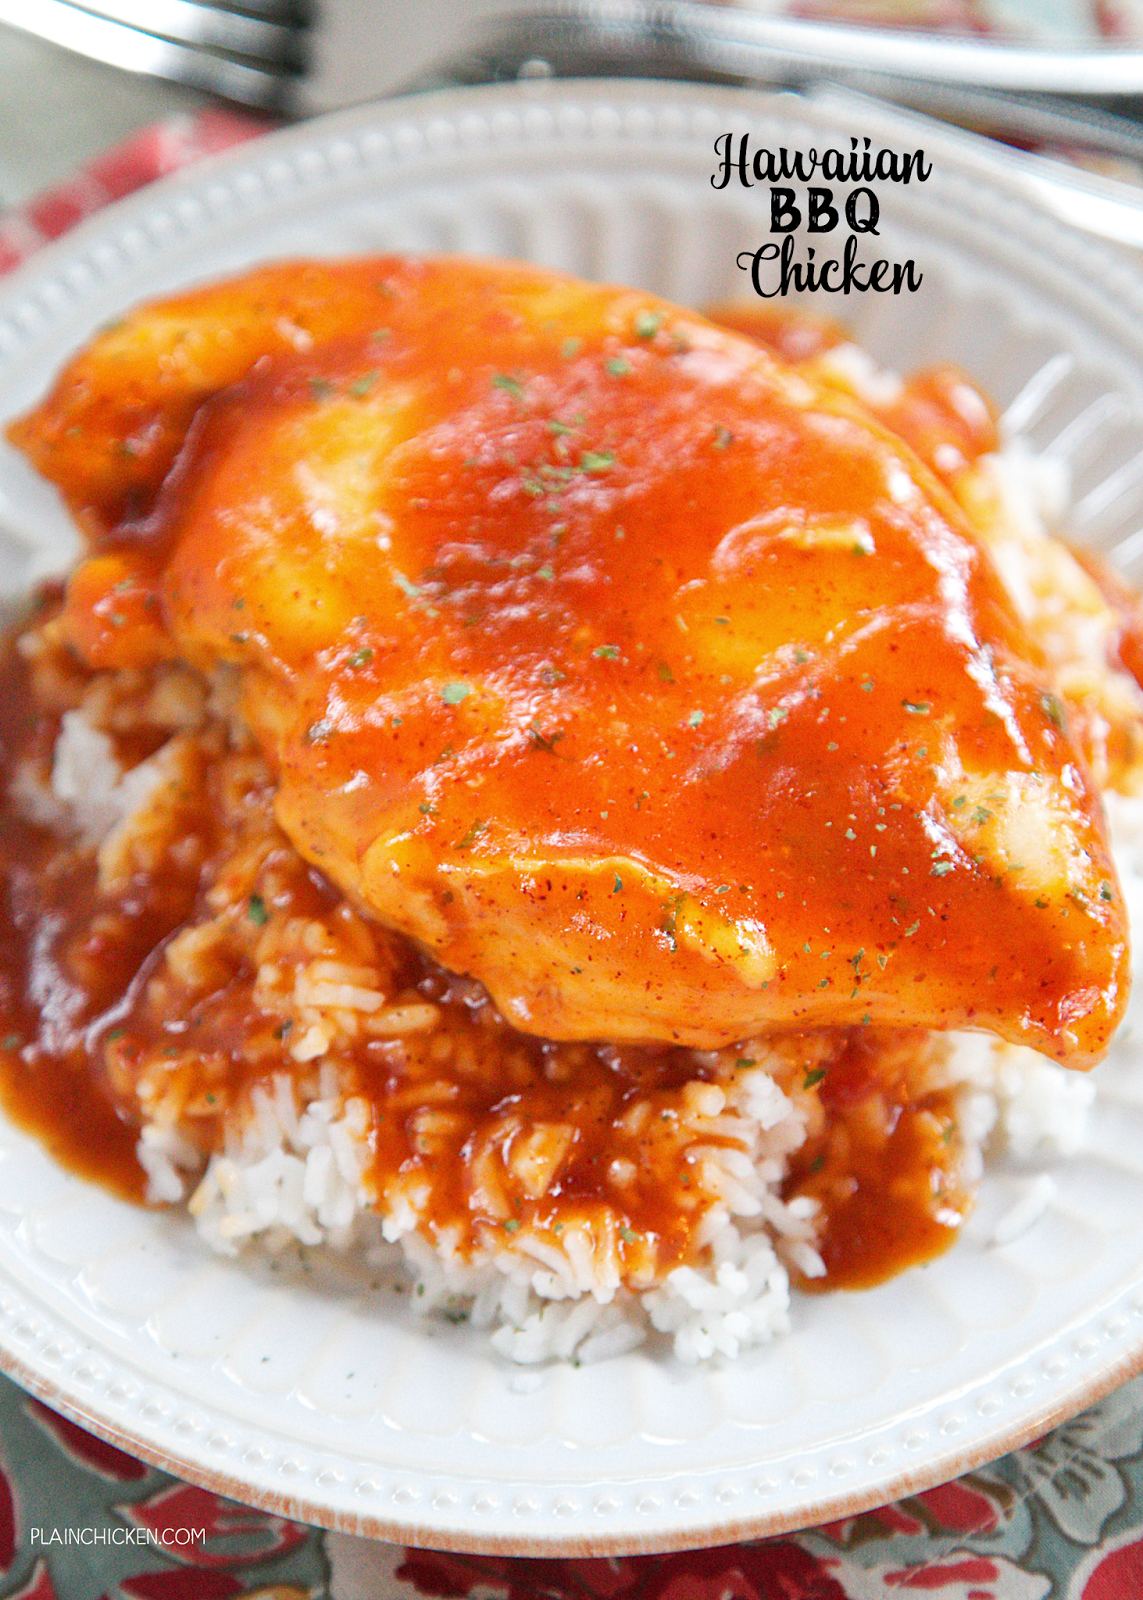 Hawaiian BBQ Chicken - chicken breasts baked in a quick pineapple bbq sauce. Pineapple sauce, ketchup, soy sauce, Worcestershire, vinegar, chili powder, and cornstarch. Bring to a boil and pour over the chicken then bake. No prep work! Super easy and quick recipe! Serve over rice or noodles - make sure to pour the extra bbq sauce over the chicken - it is SOOOO good! We could not stop eating this!